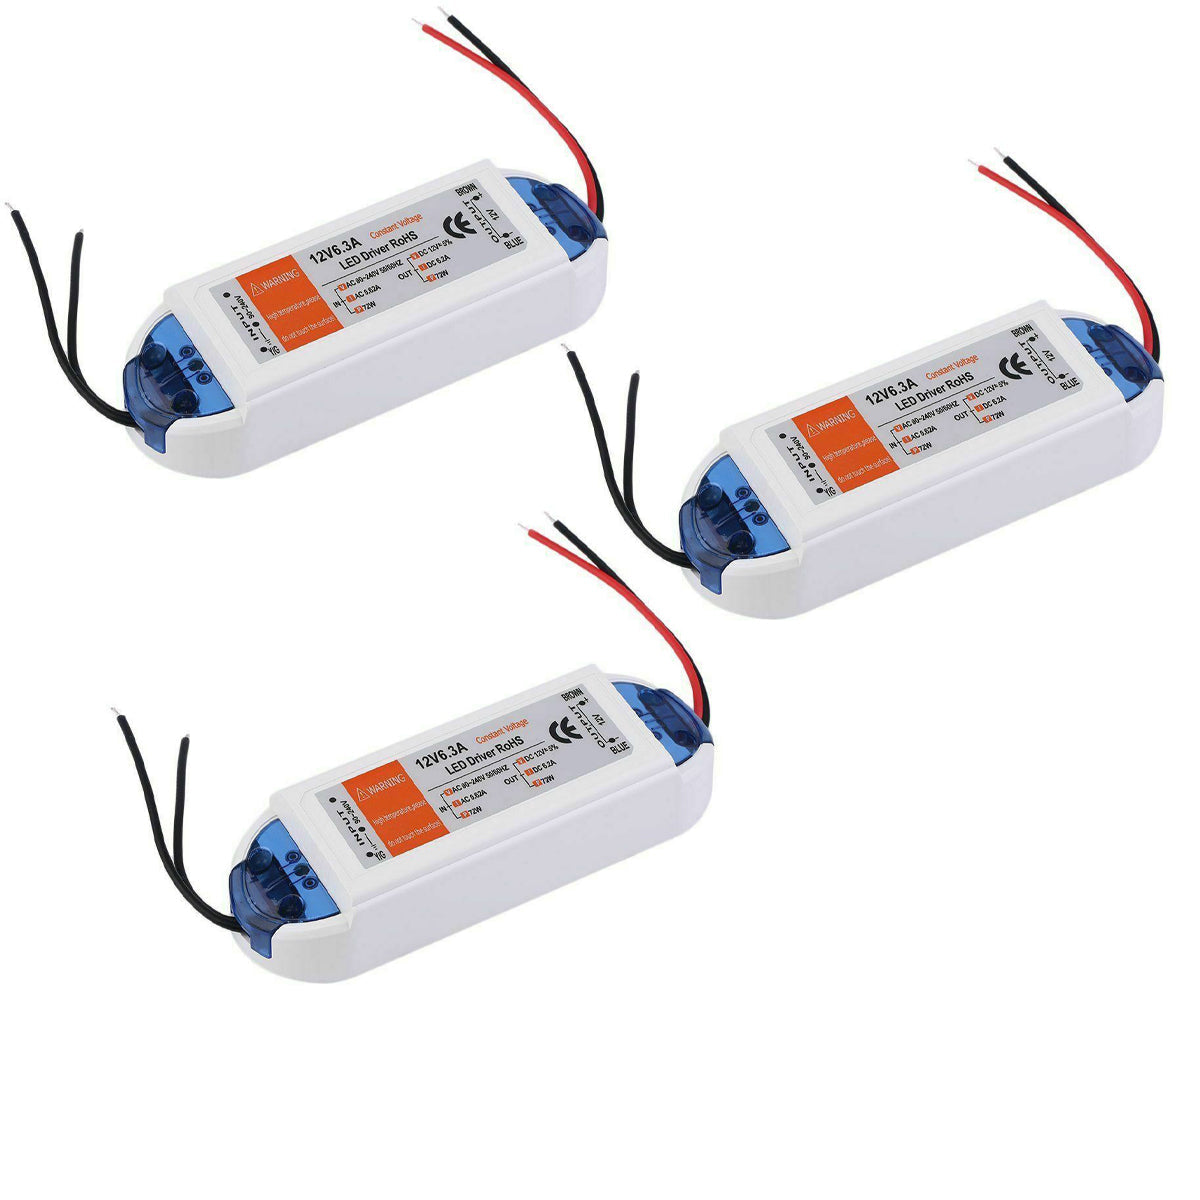 6.2A 72W Constant Voltage LED Driver DC 12V Power Supply~1003-5